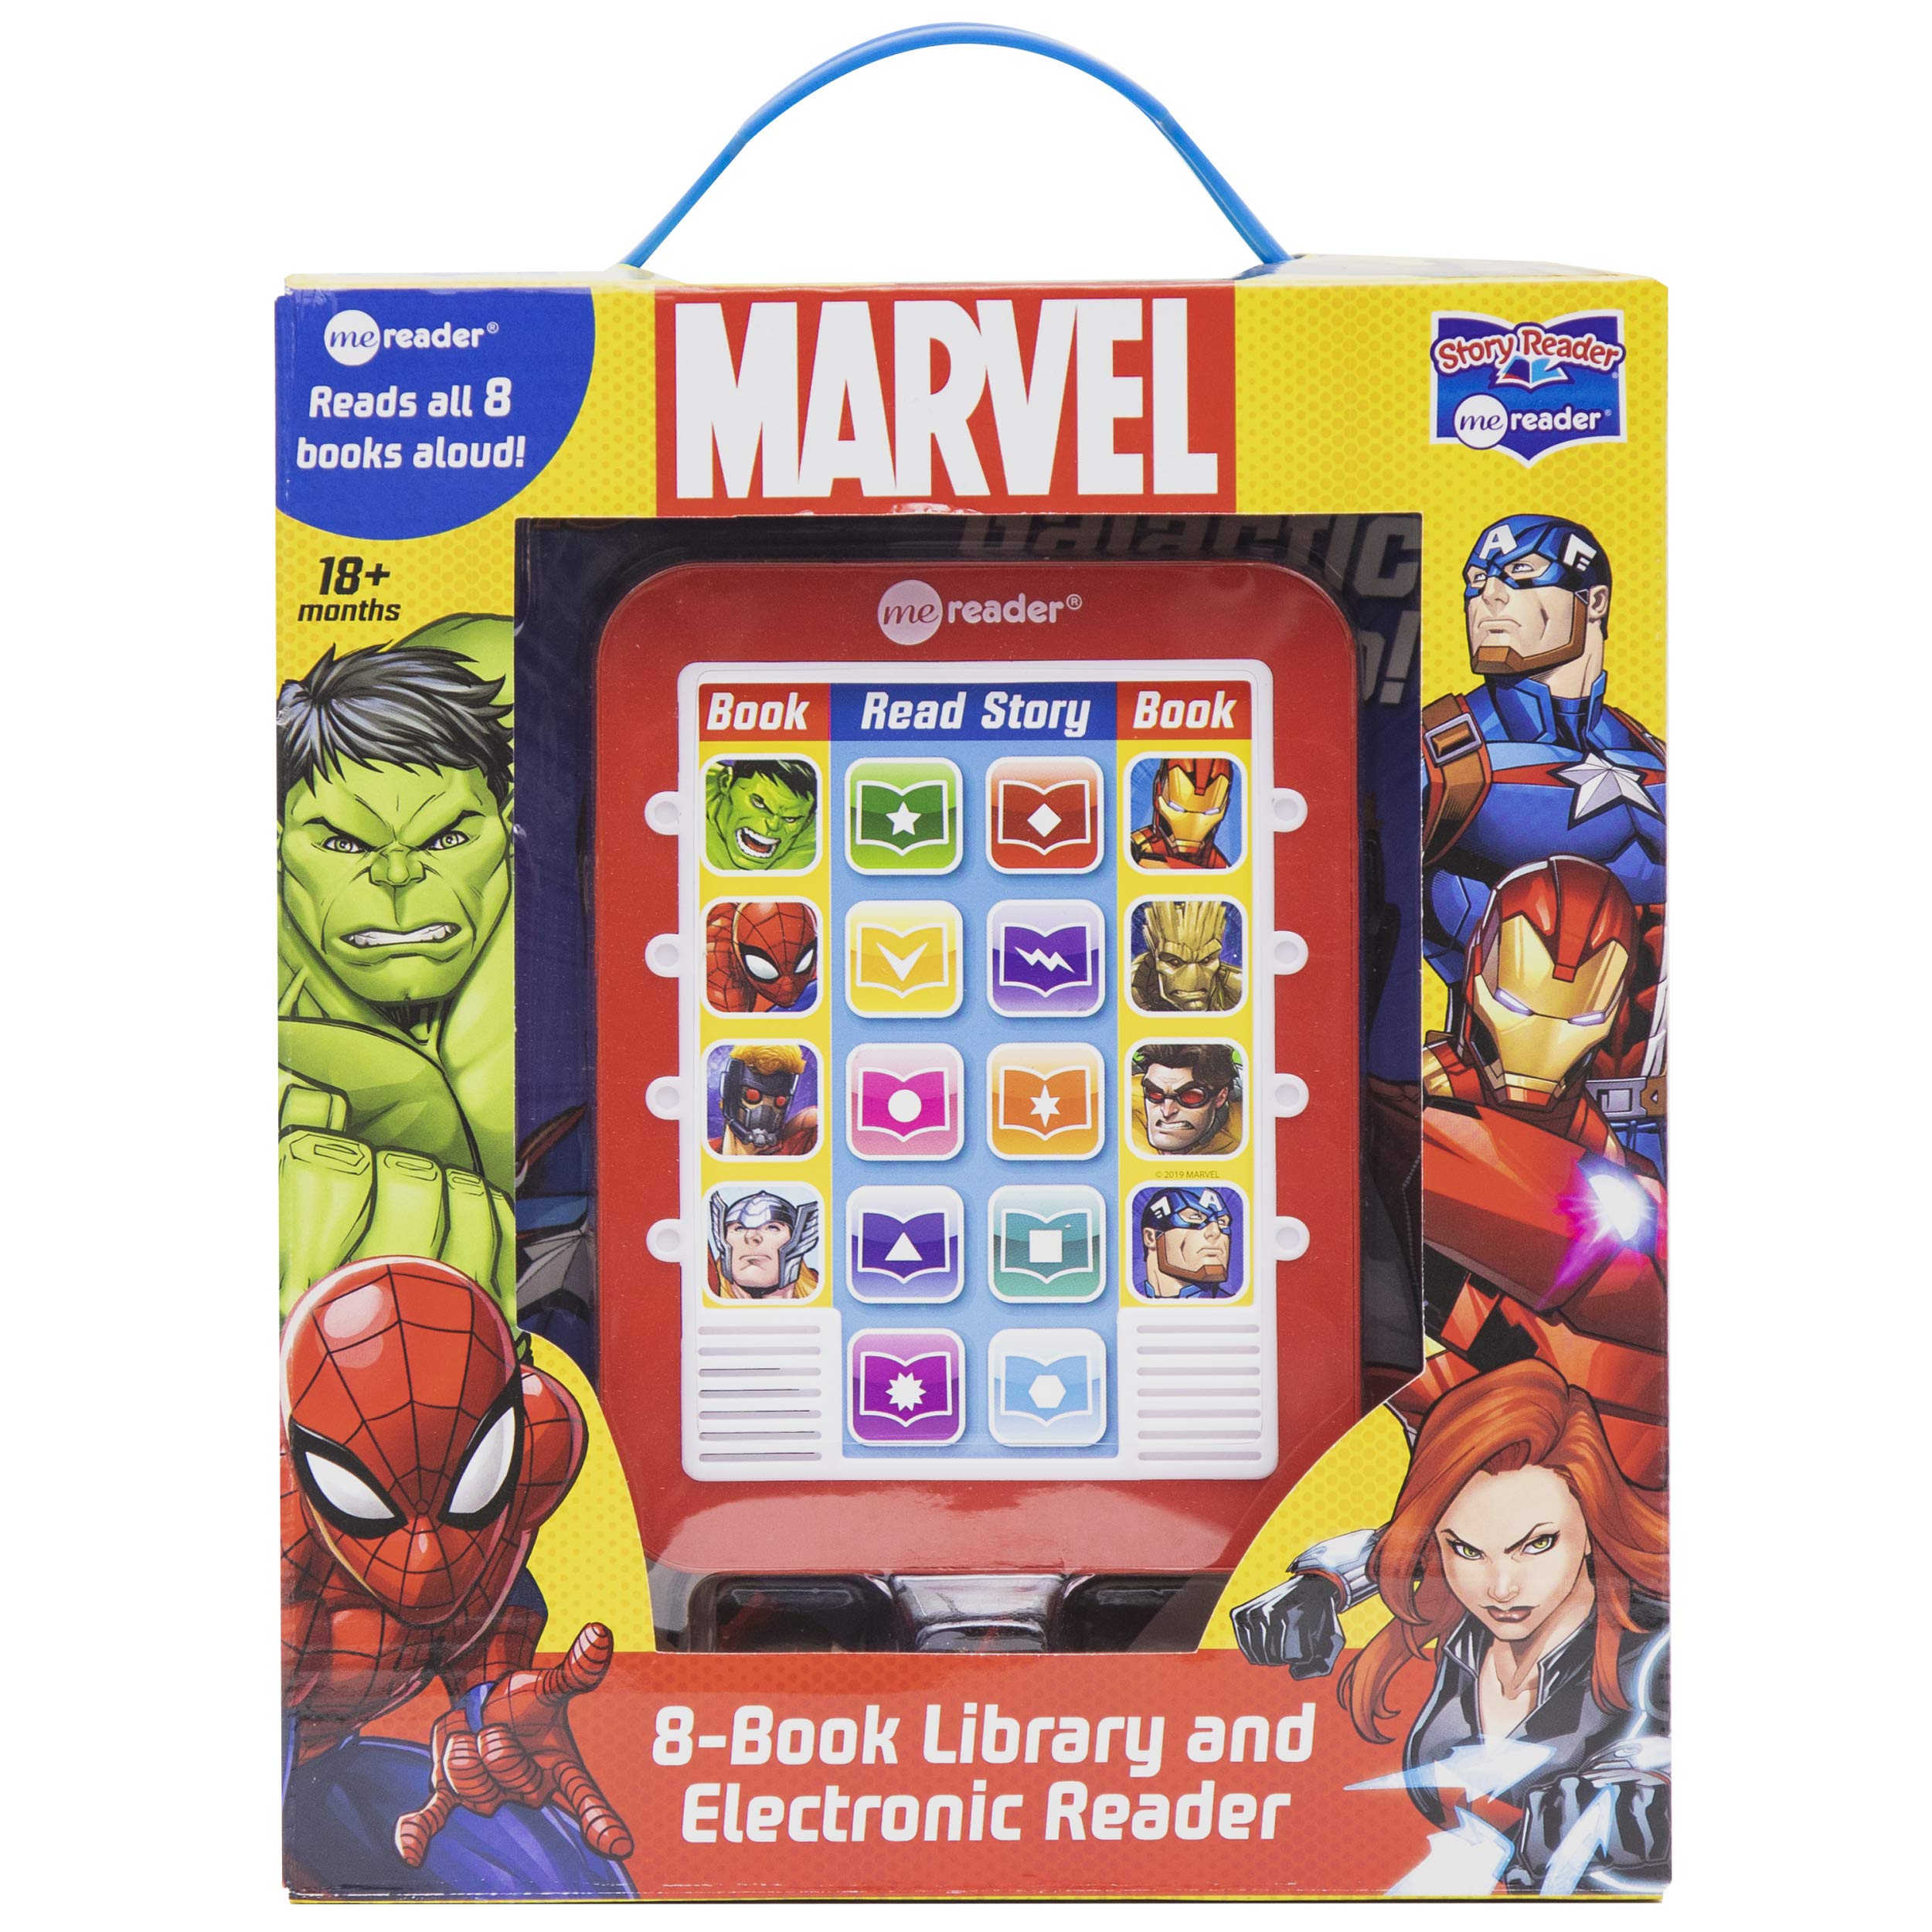 Marvel Super Heroes Spider-man, Avengers, Guardians, and More! - Me Reader Electronic Reader with 8 Book Library - PI Kids